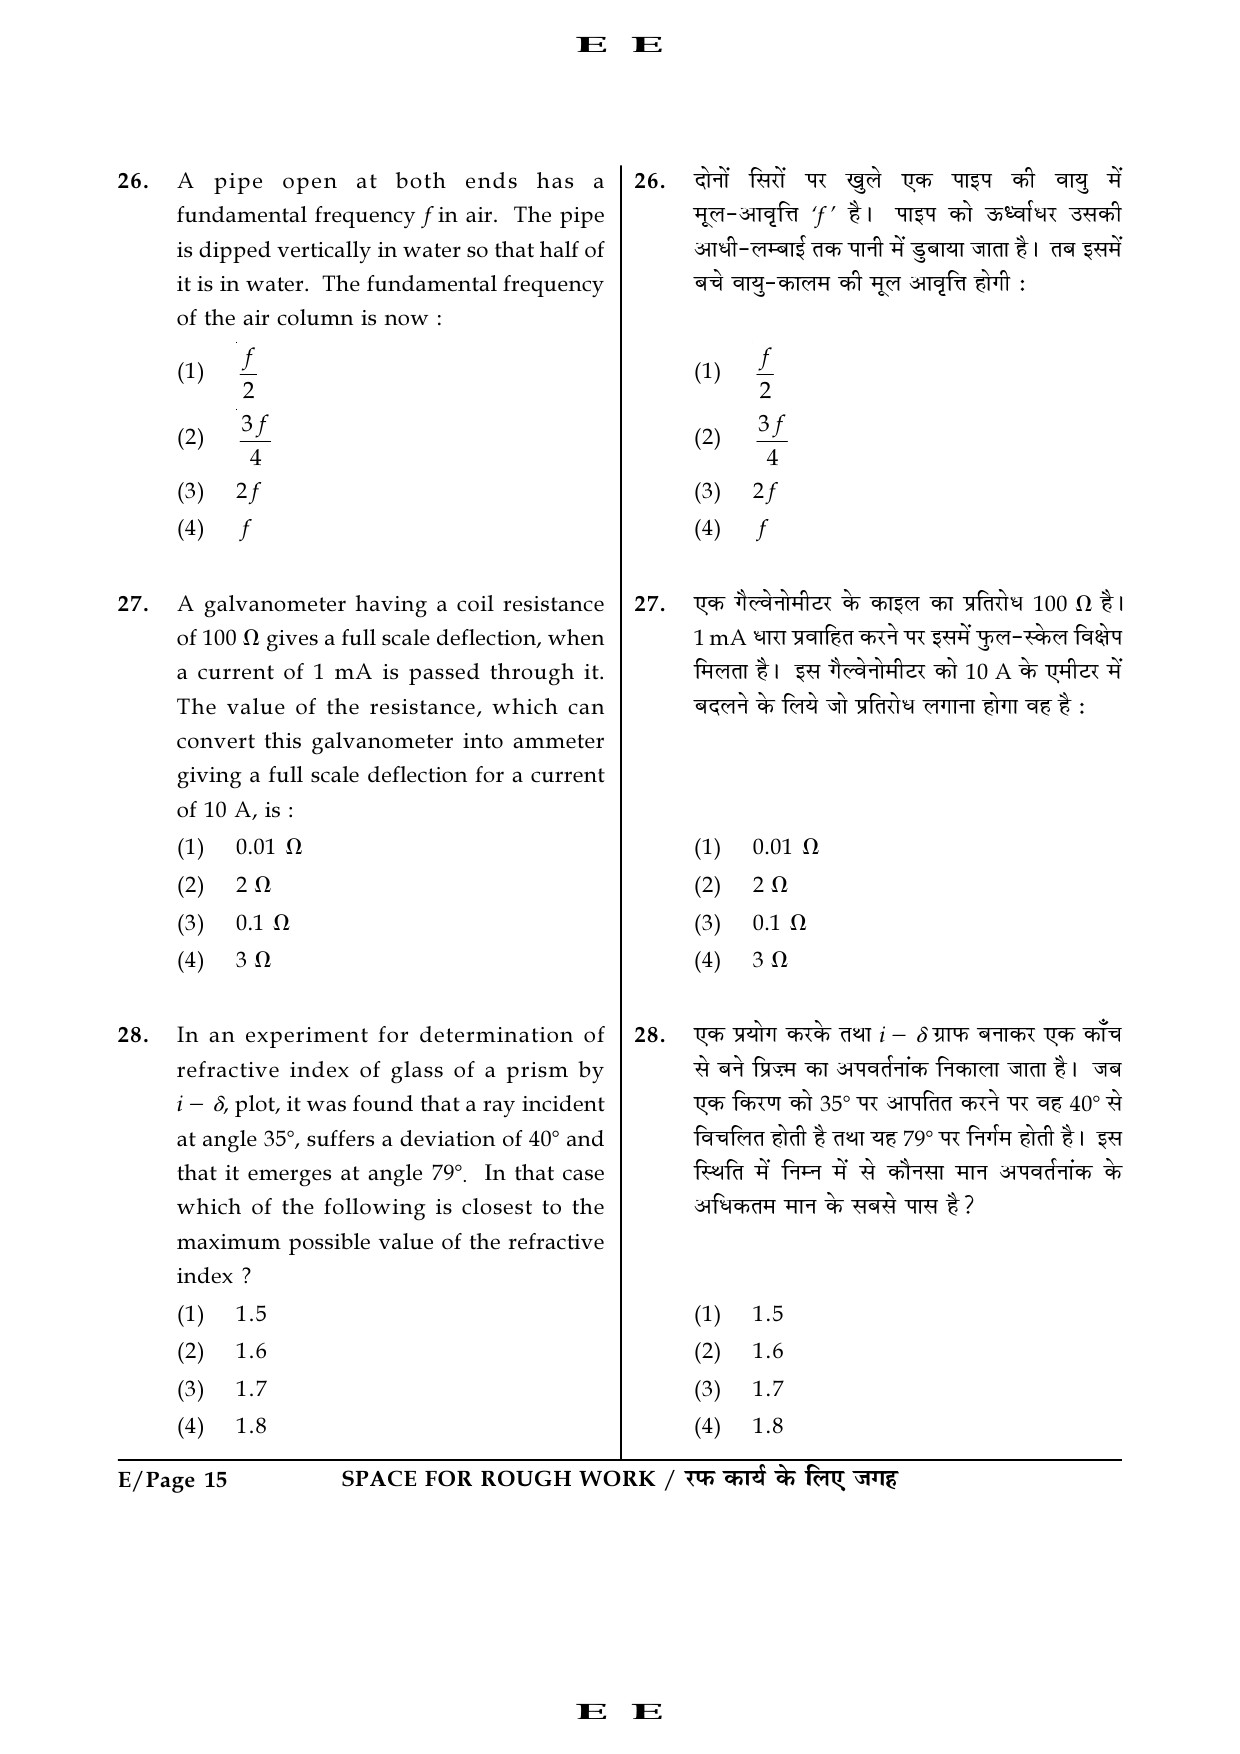 JEE Main Exam Question Paper 2016 Booklet E 15